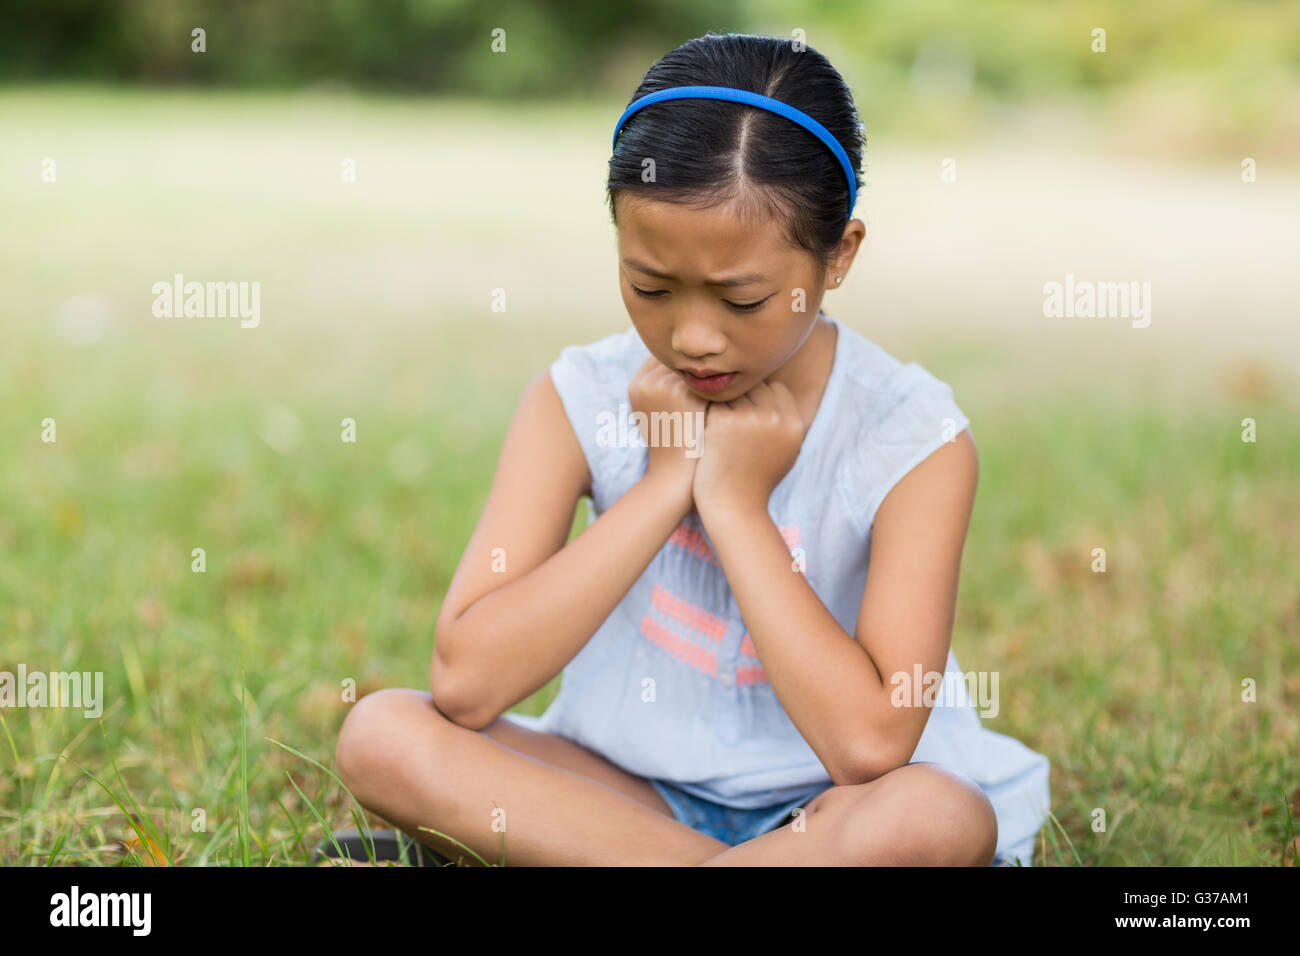 Upset girl sitting on grass Banque D'Images